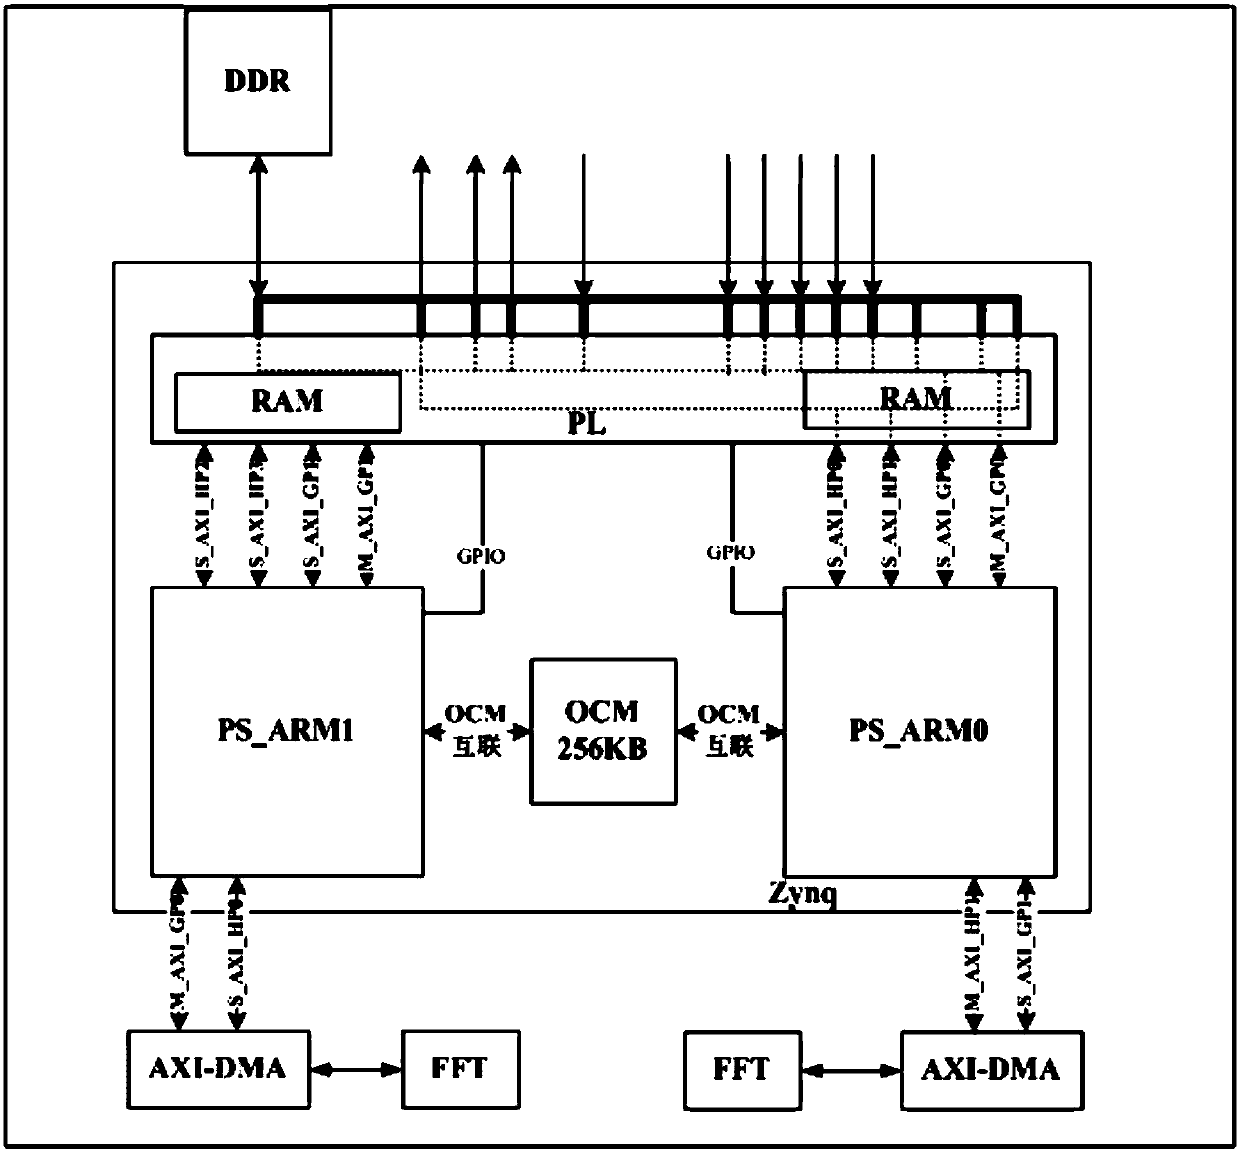 Signal processing architecture transplanting method based on a ZYNQ platform